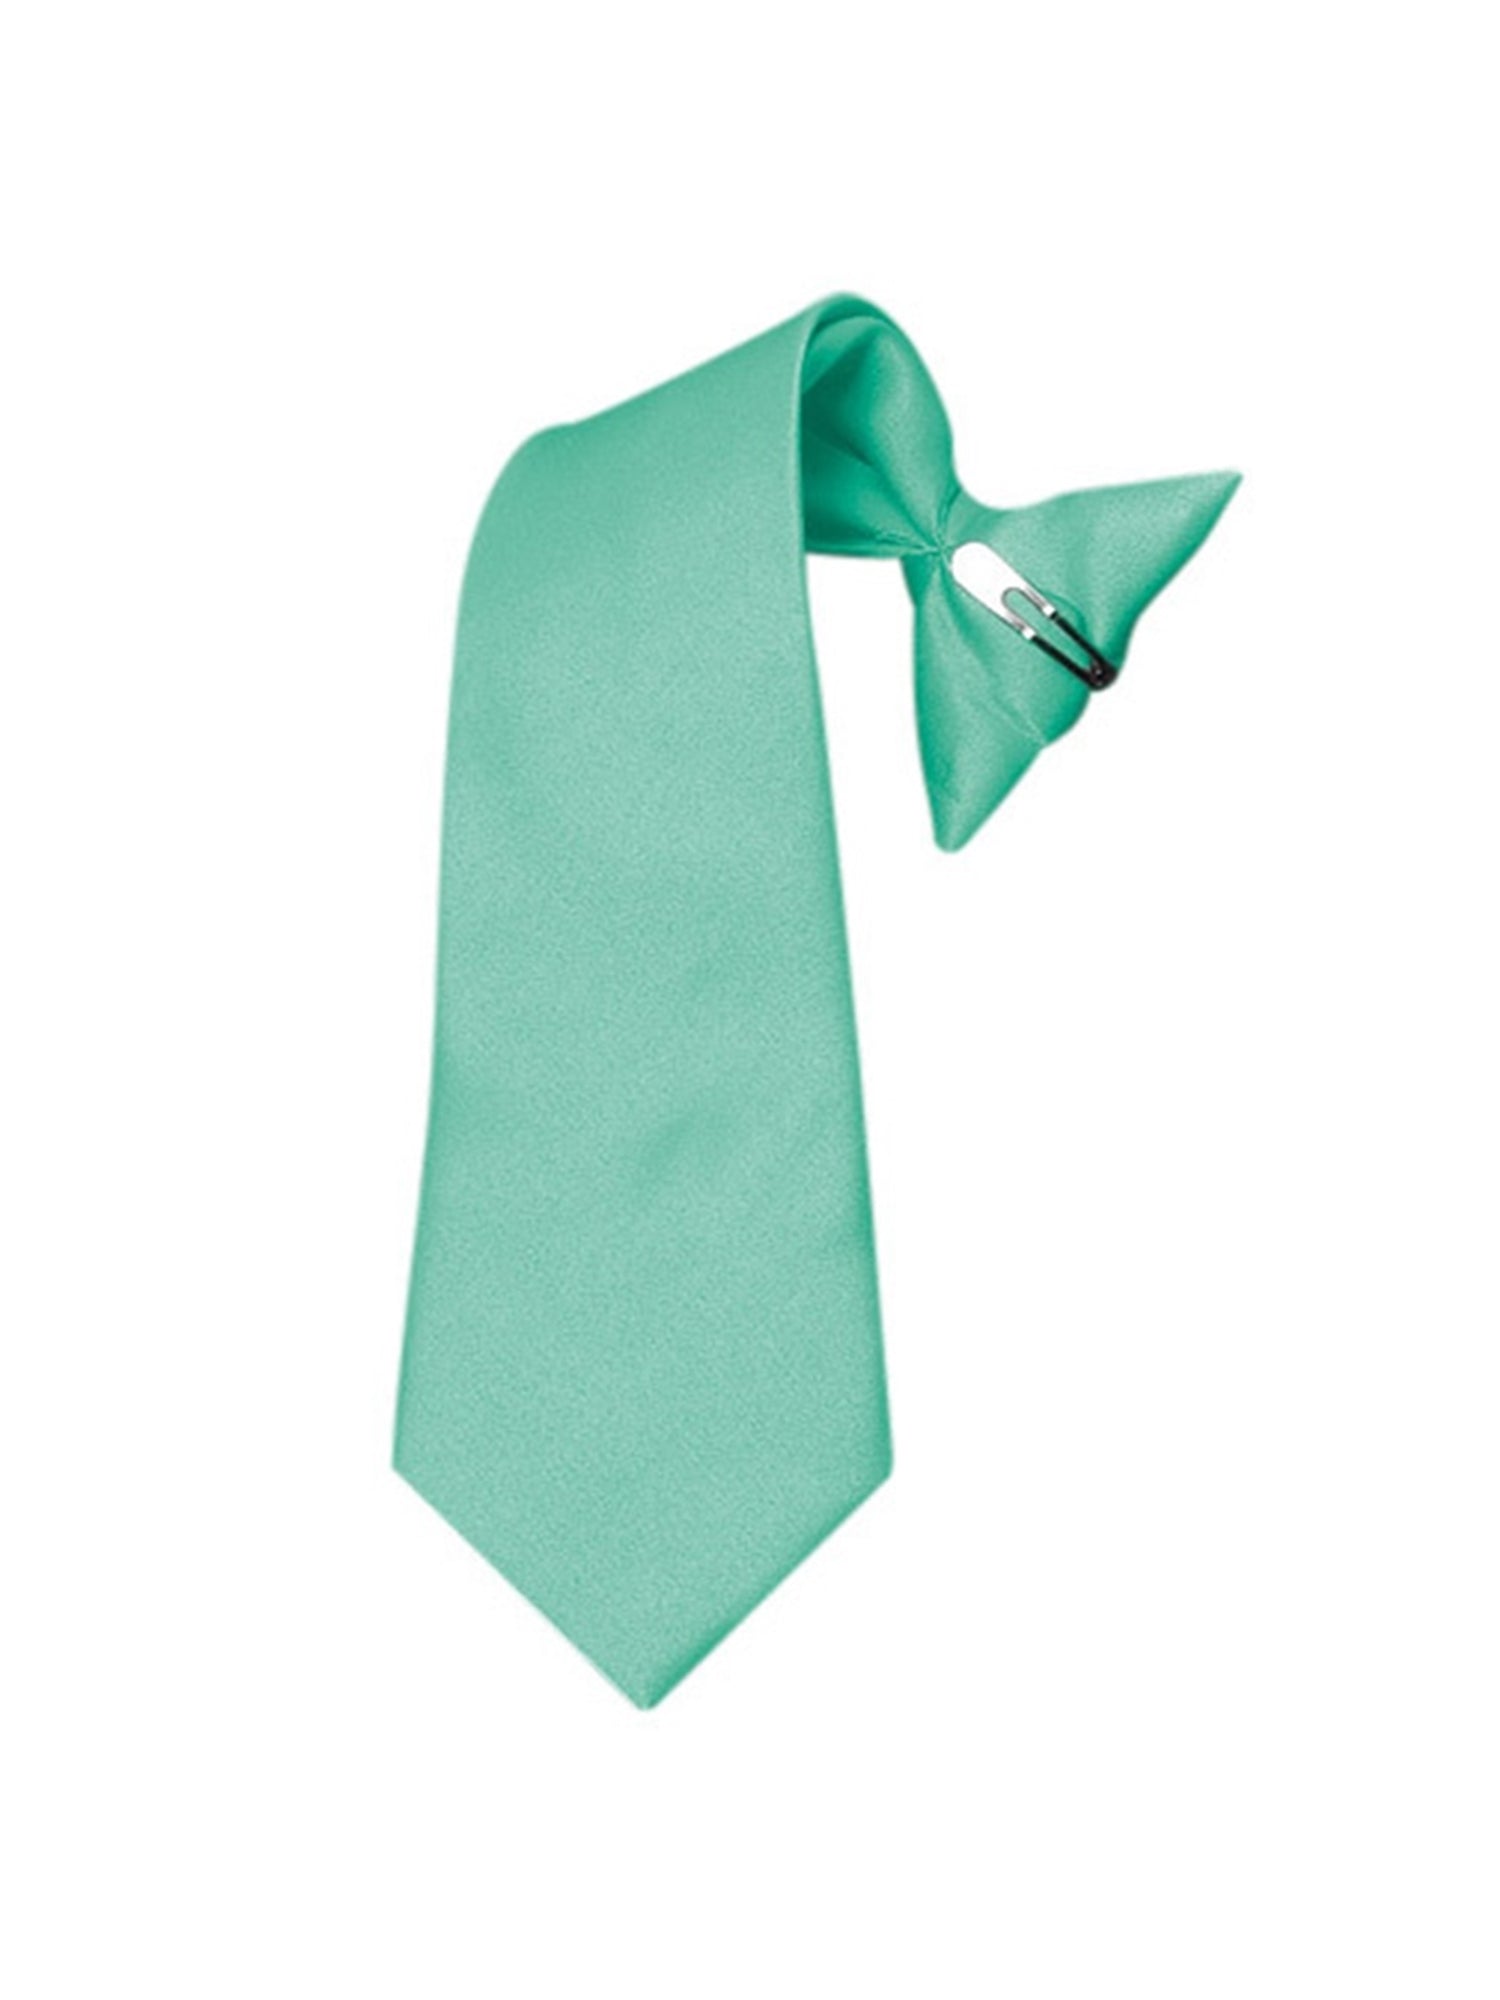 Boy's Solid Color Pre-tied Clip On Neck Tie Neck Tie TheDapperTie Turquoise 8" x 2.5" 